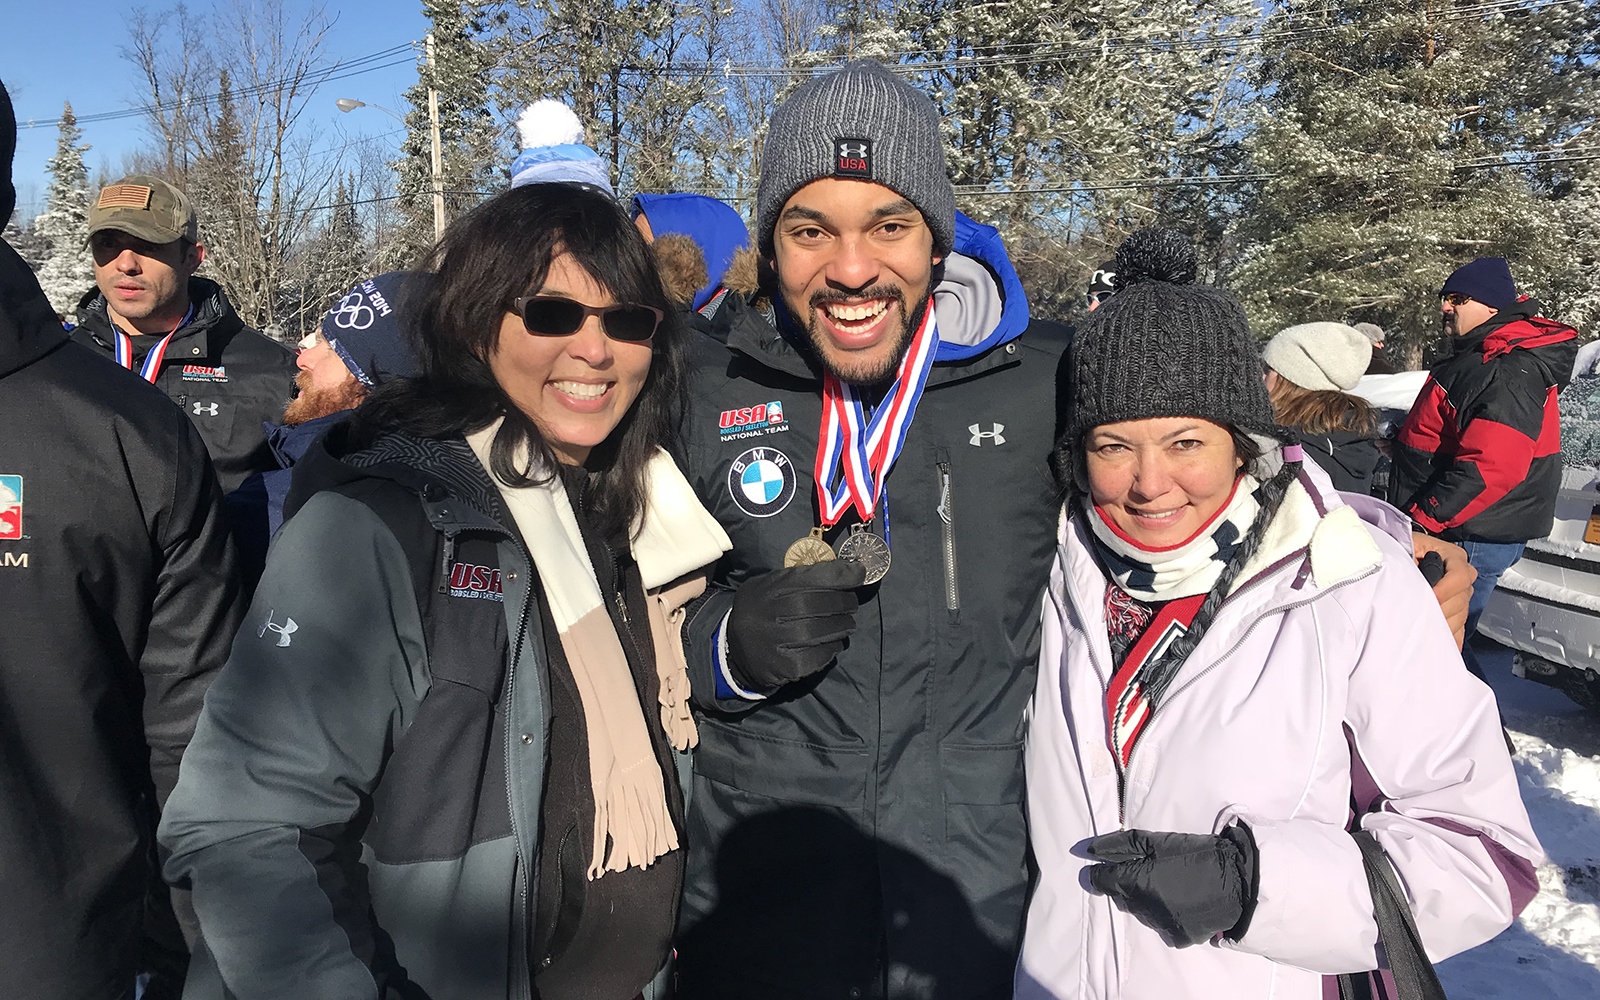 Sandra Kinney (left), her son Chris, and her sister at the North America’s Cup in Lake Placid, New York, on Jan. 14. The event was the final qualifier for the 2018 Winter Olympics. Chris earned a gold and silver medal and the event.